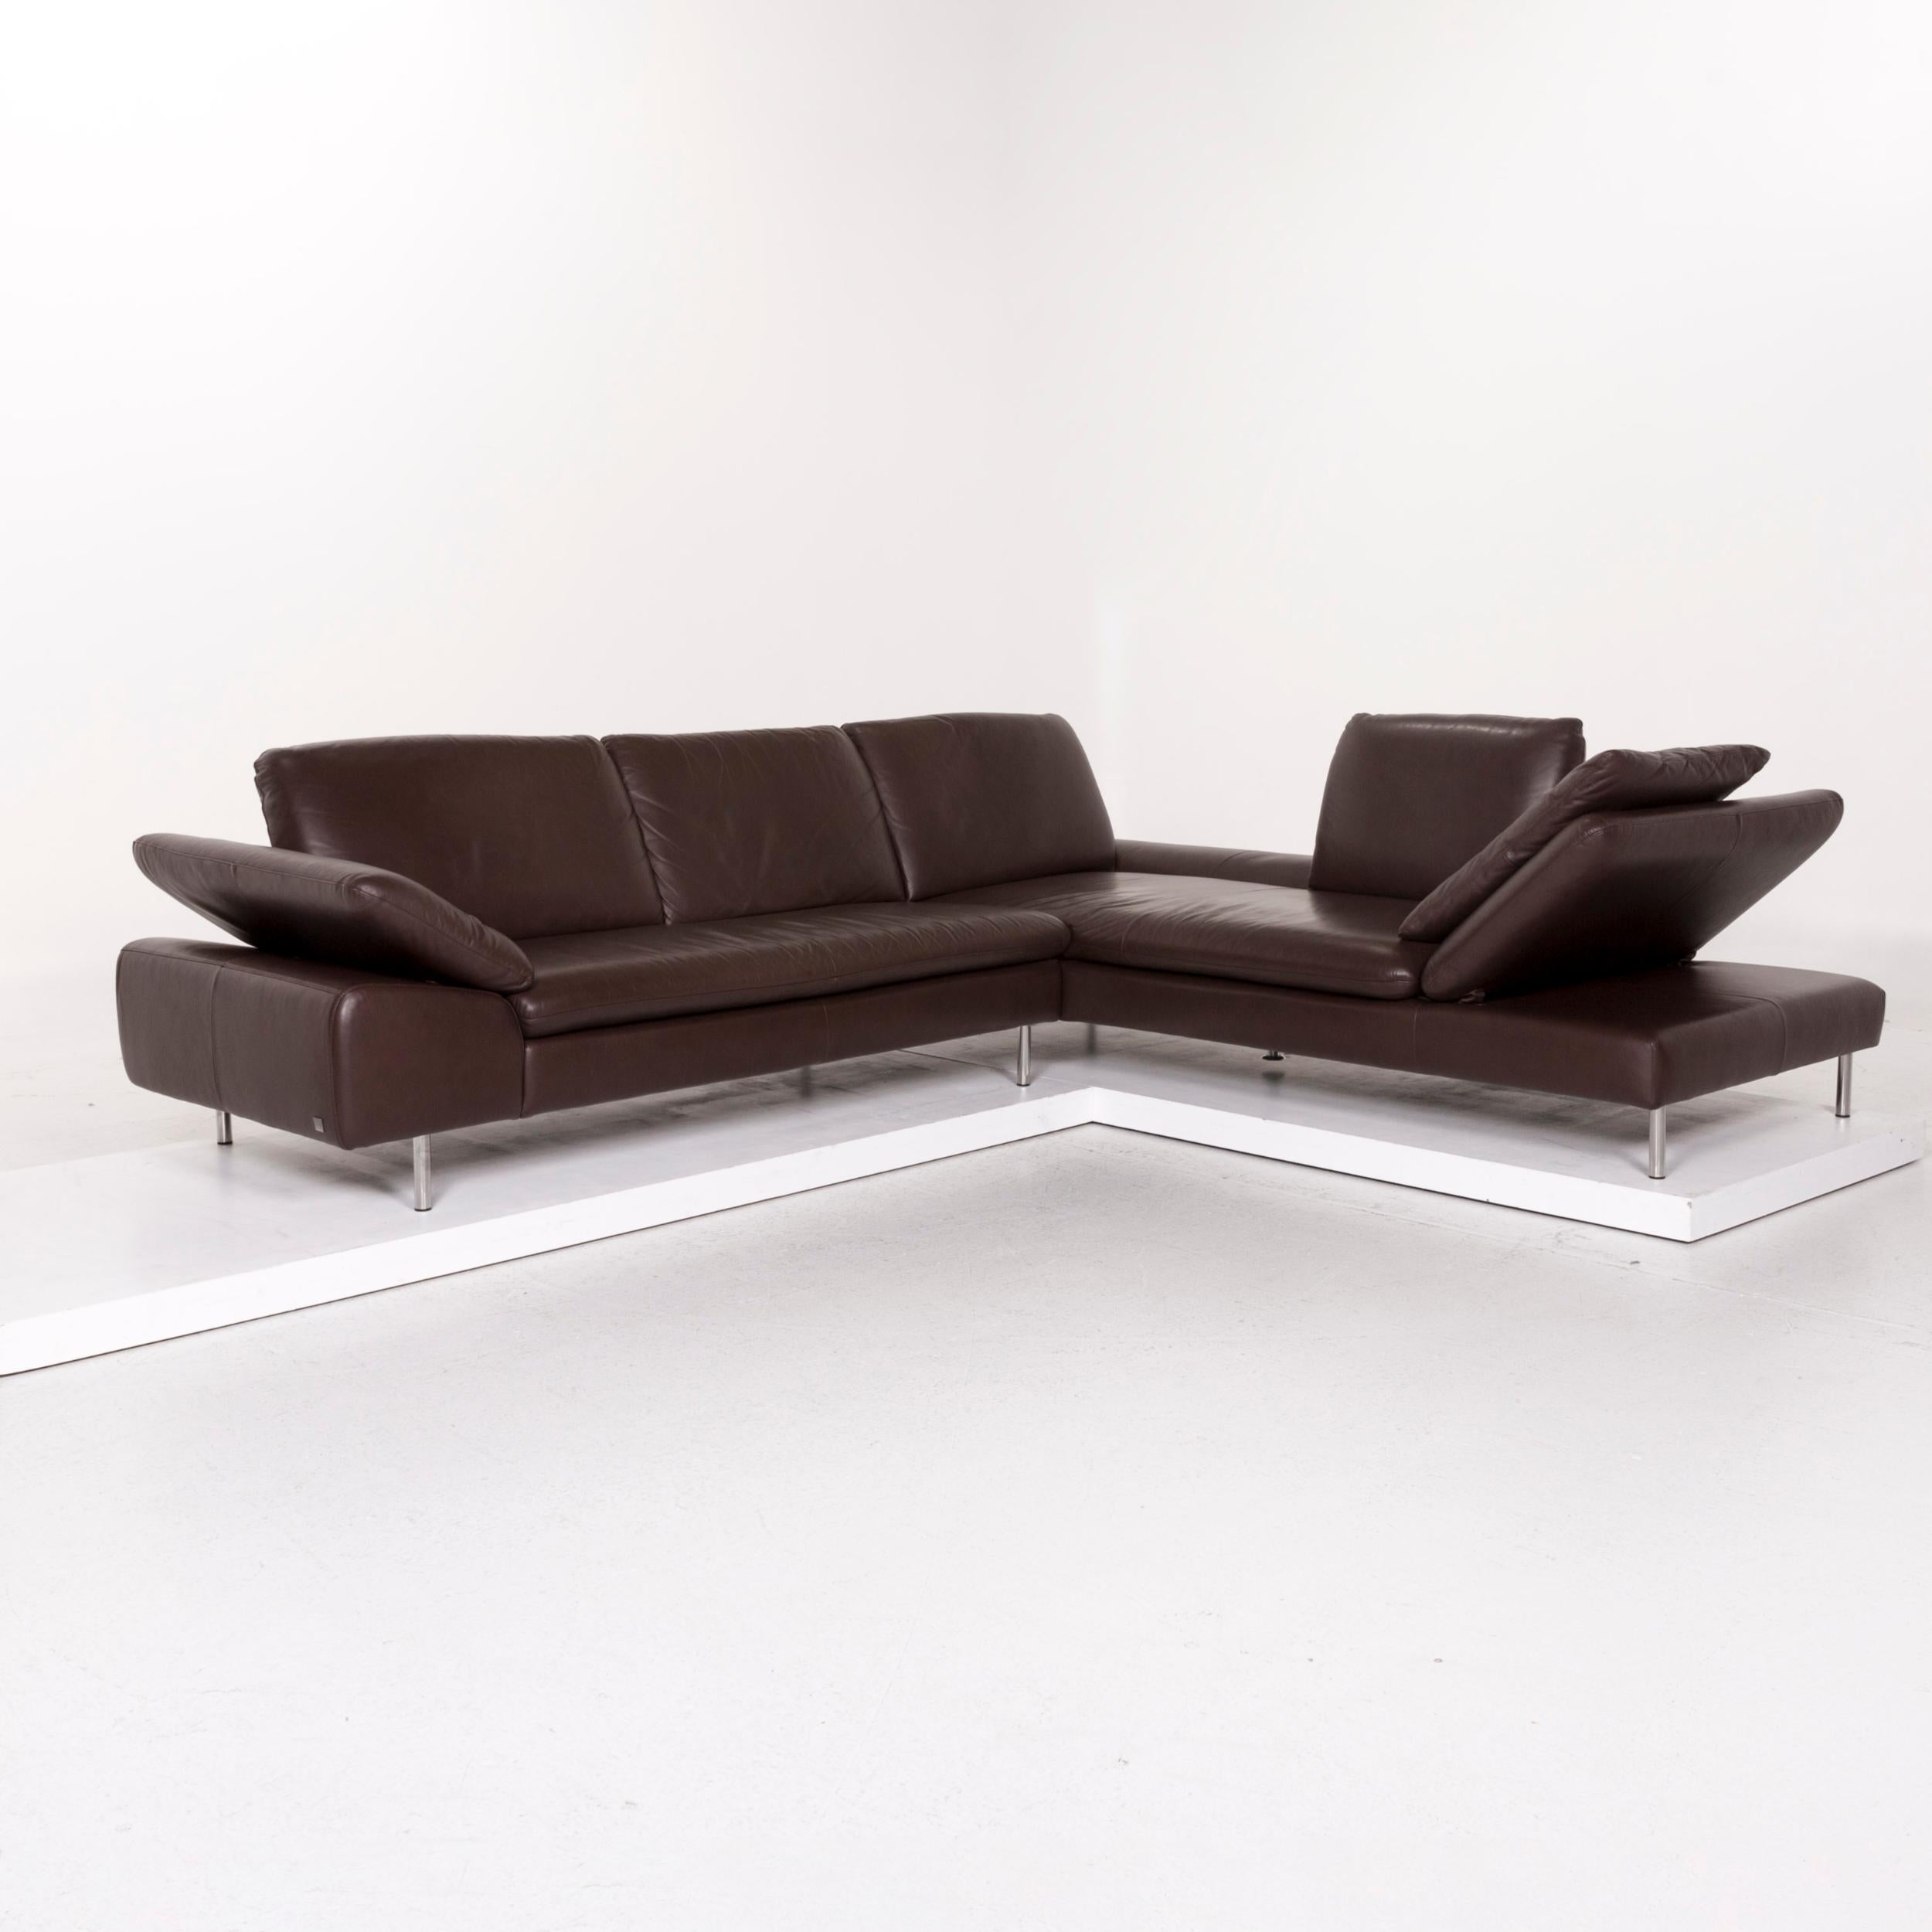 We bring to you a Willi Schillig loop leather corner sofa brown dark brown sofa function couch.

 

 Product measurements in centimeters:
 

Depth 102
Width 238
Height 79
Seat-height 41
Rest-height 41
Seat-depth 53
Seat-width